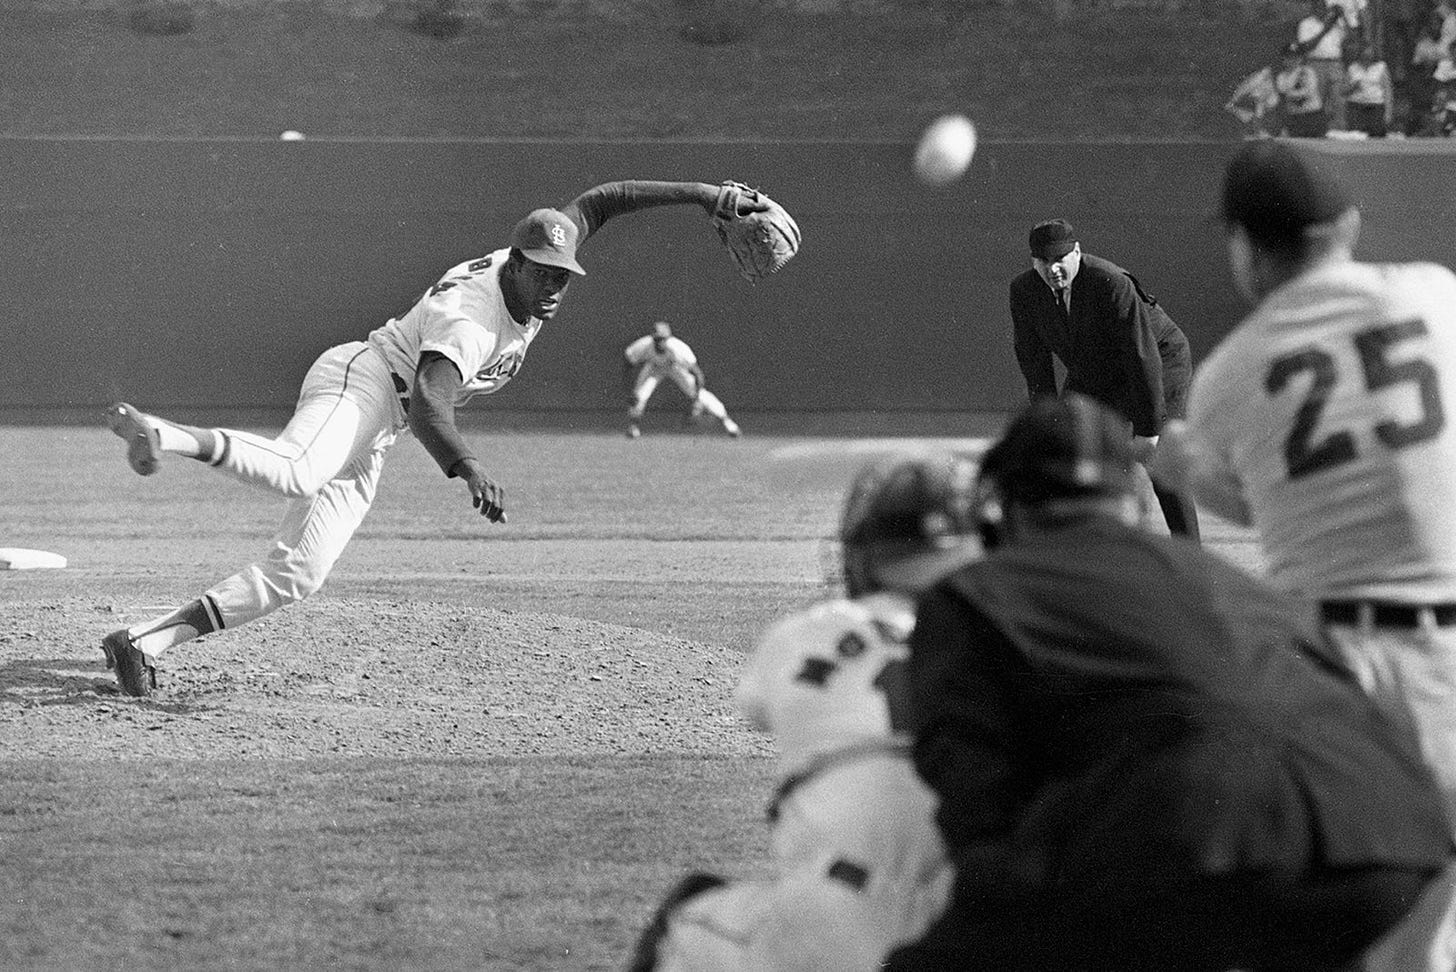 Bob Gibson pitching during the ninth inning of the first game of the 1968 World Series at Busch Stadium in St. Louis...